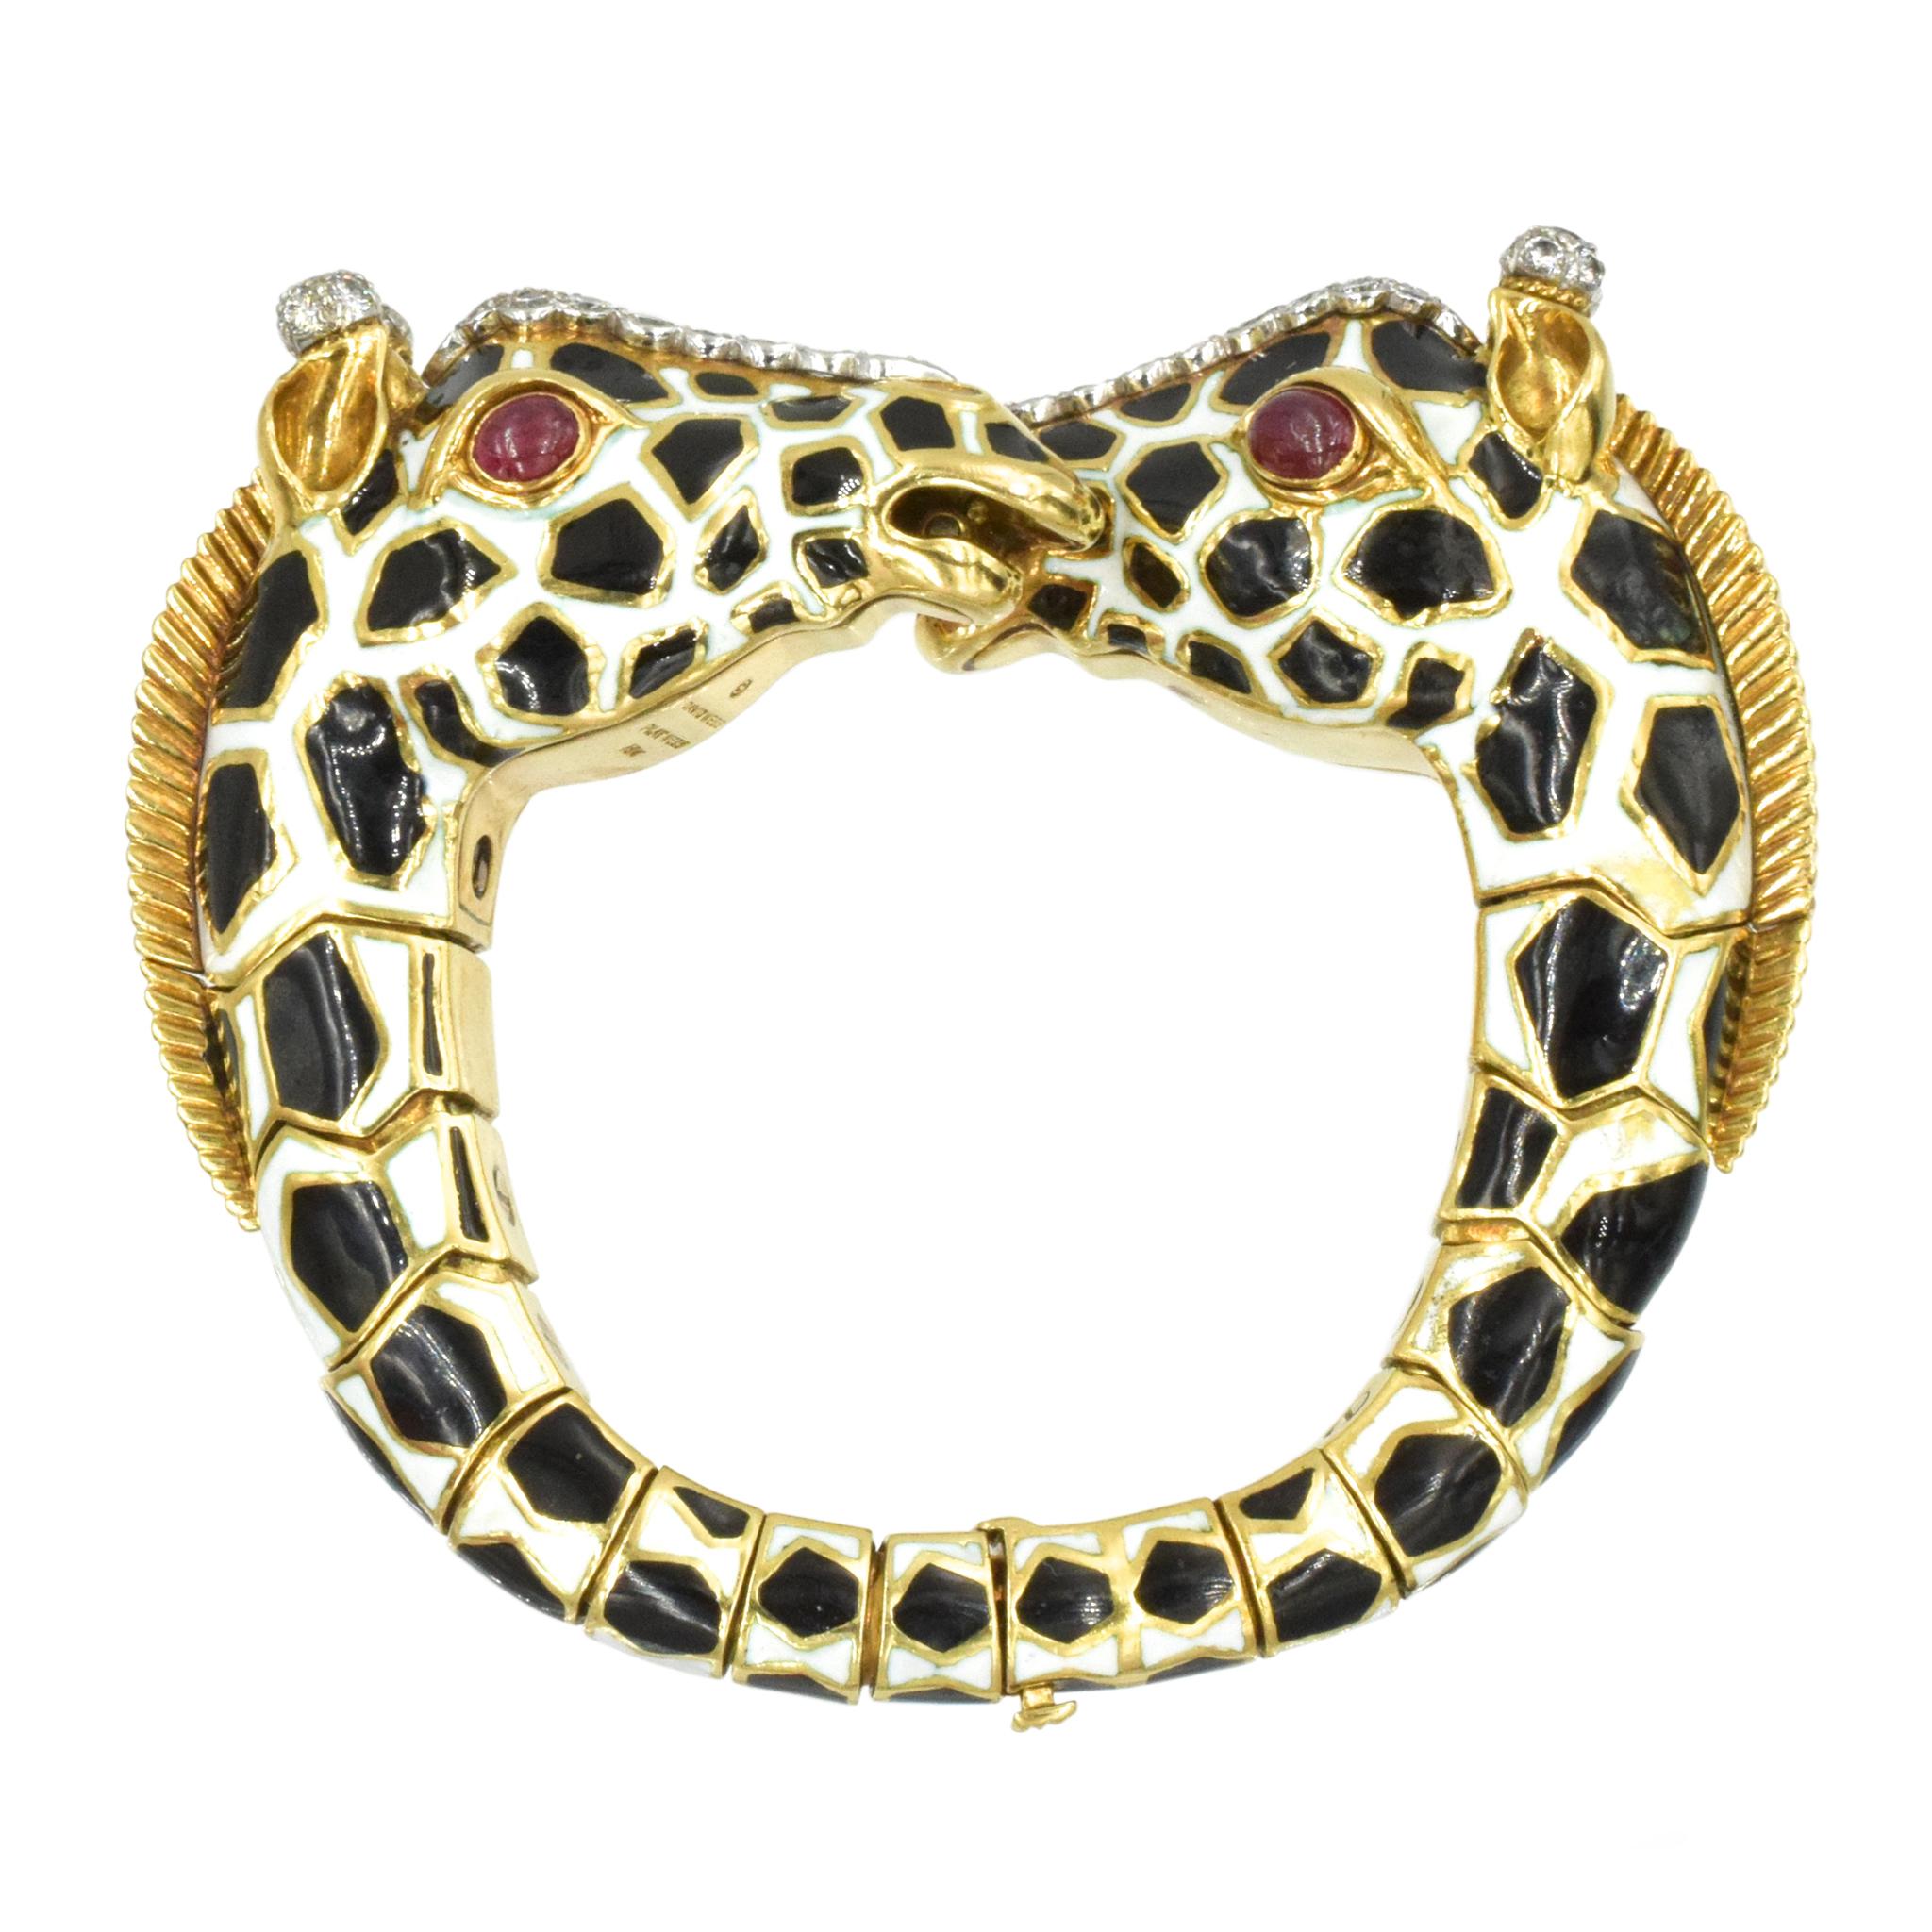 David Webb Diamond, Ruby And Enamel Giraffe Bracelet  In 18k Yellow Gold And Platinum.
Set with ruby cabochons and round brilliant cut diamonds weighing total of approximately 2.30ct,
color G clarity VS.
 Measuring 6 inches long and 0.75 inch wide.